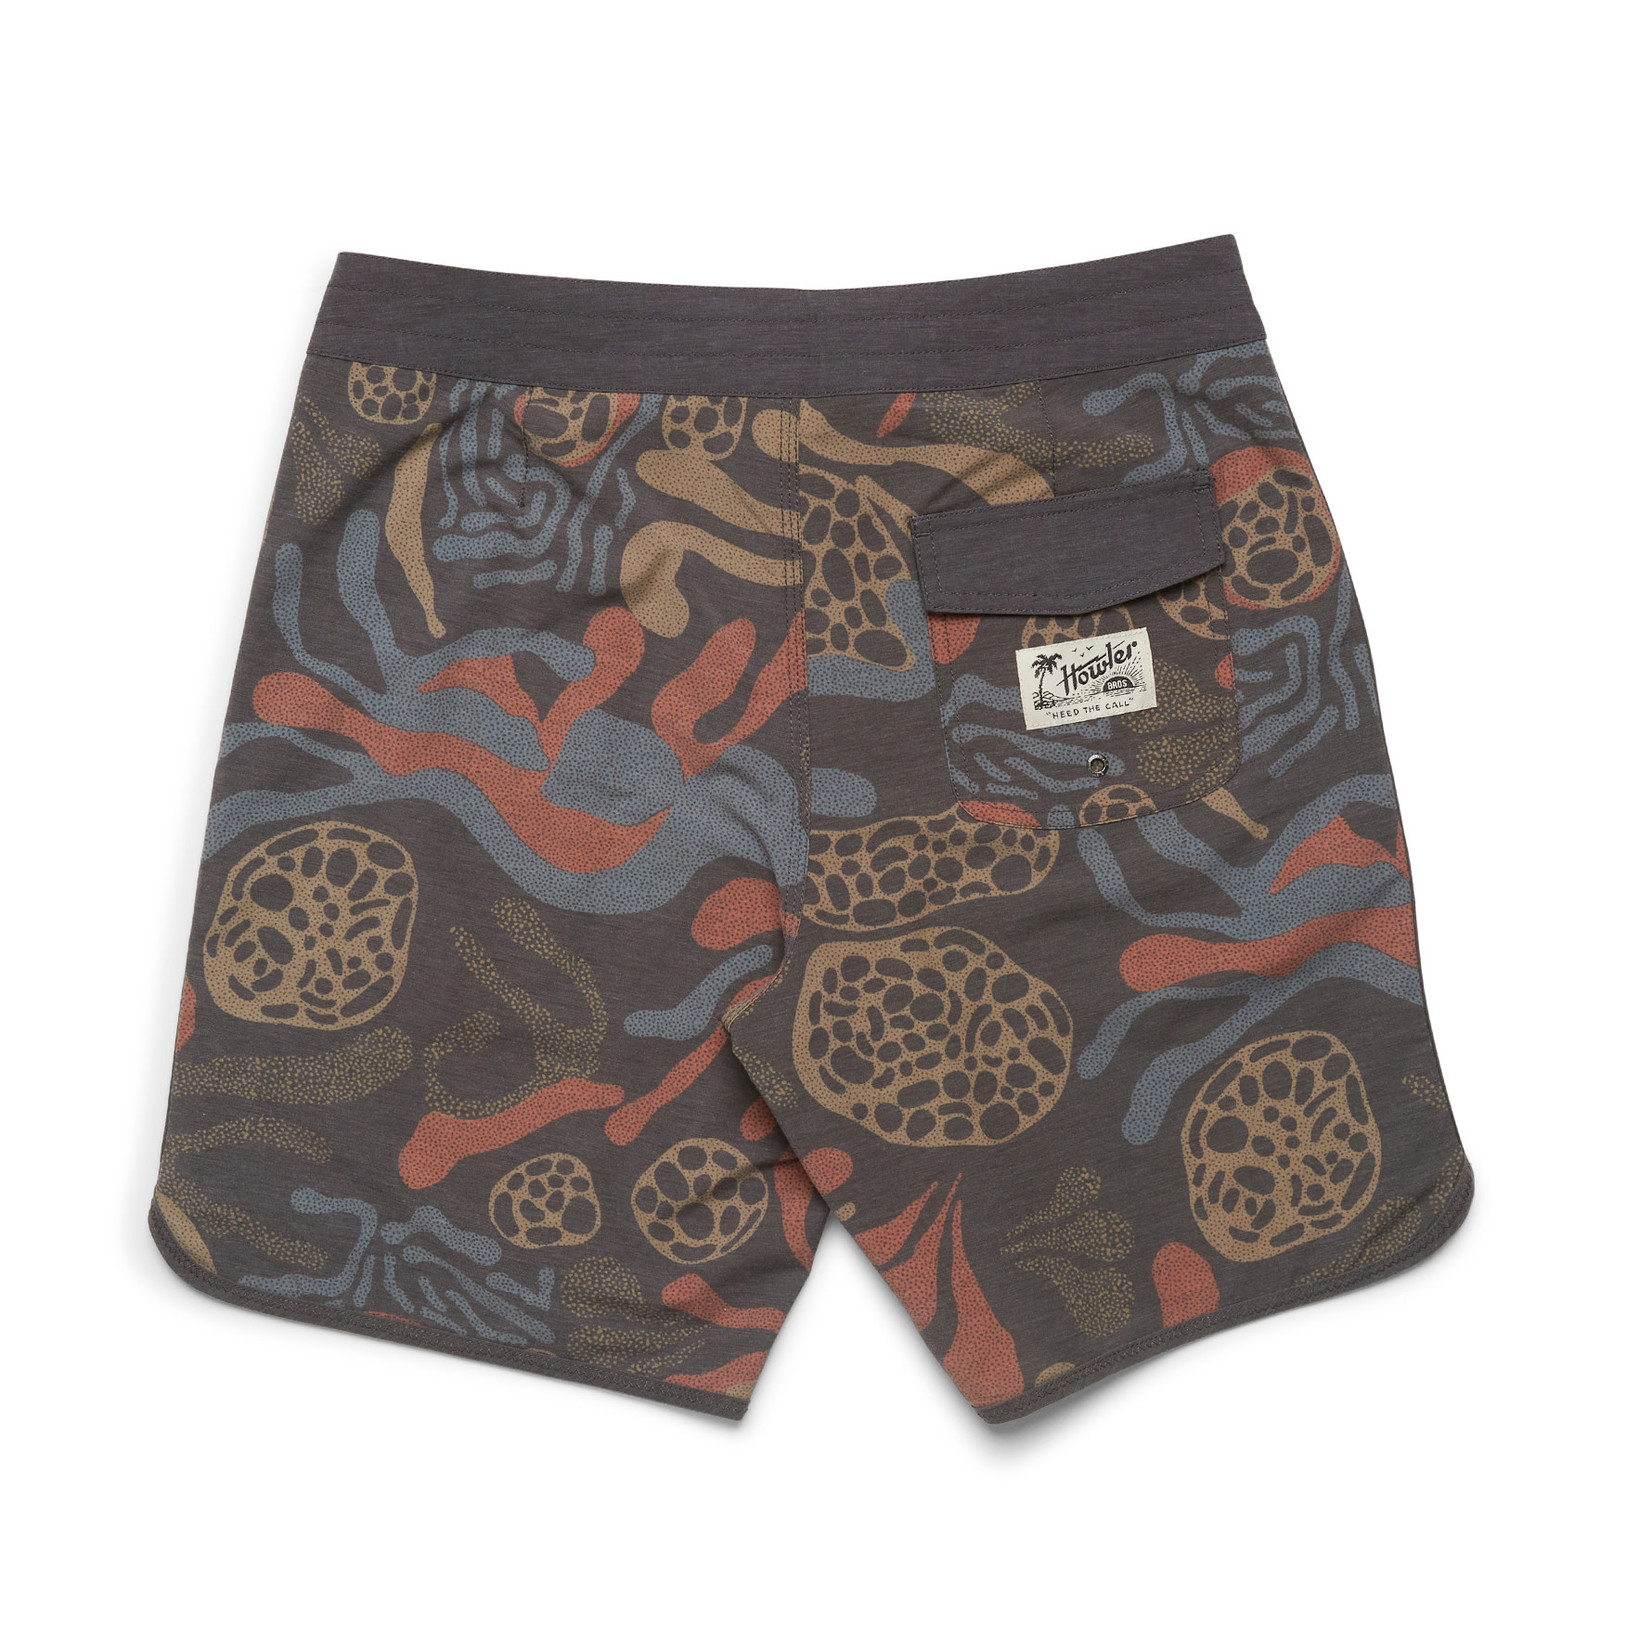 Howler Brothers Stretch Bruja Boardshorts, 8.5 inseam